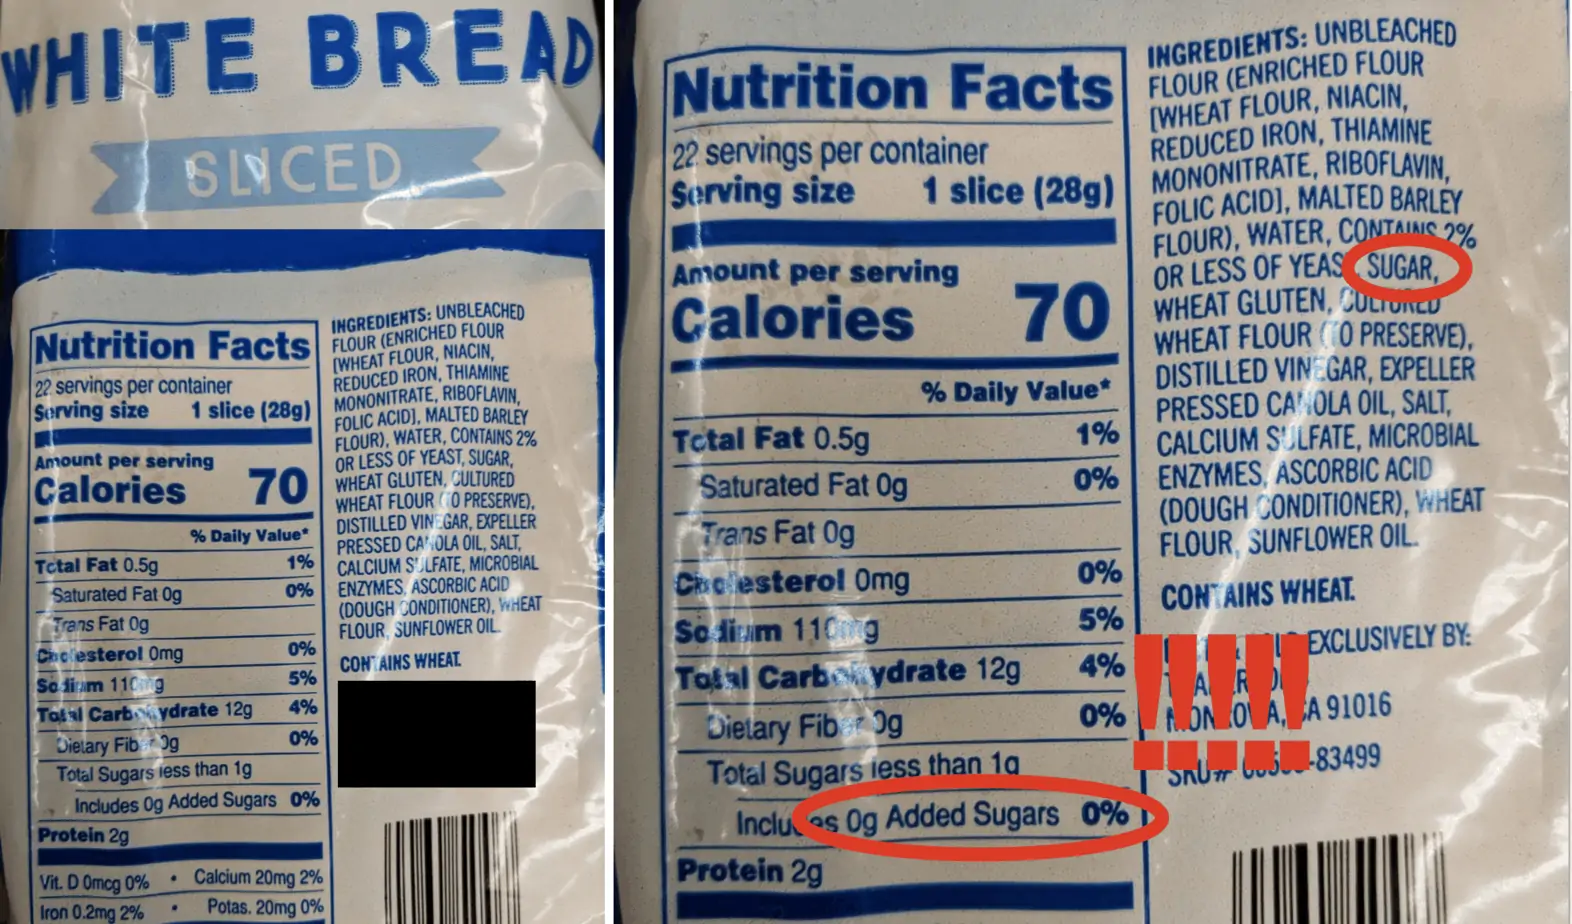 Nutrition facts label for white bread